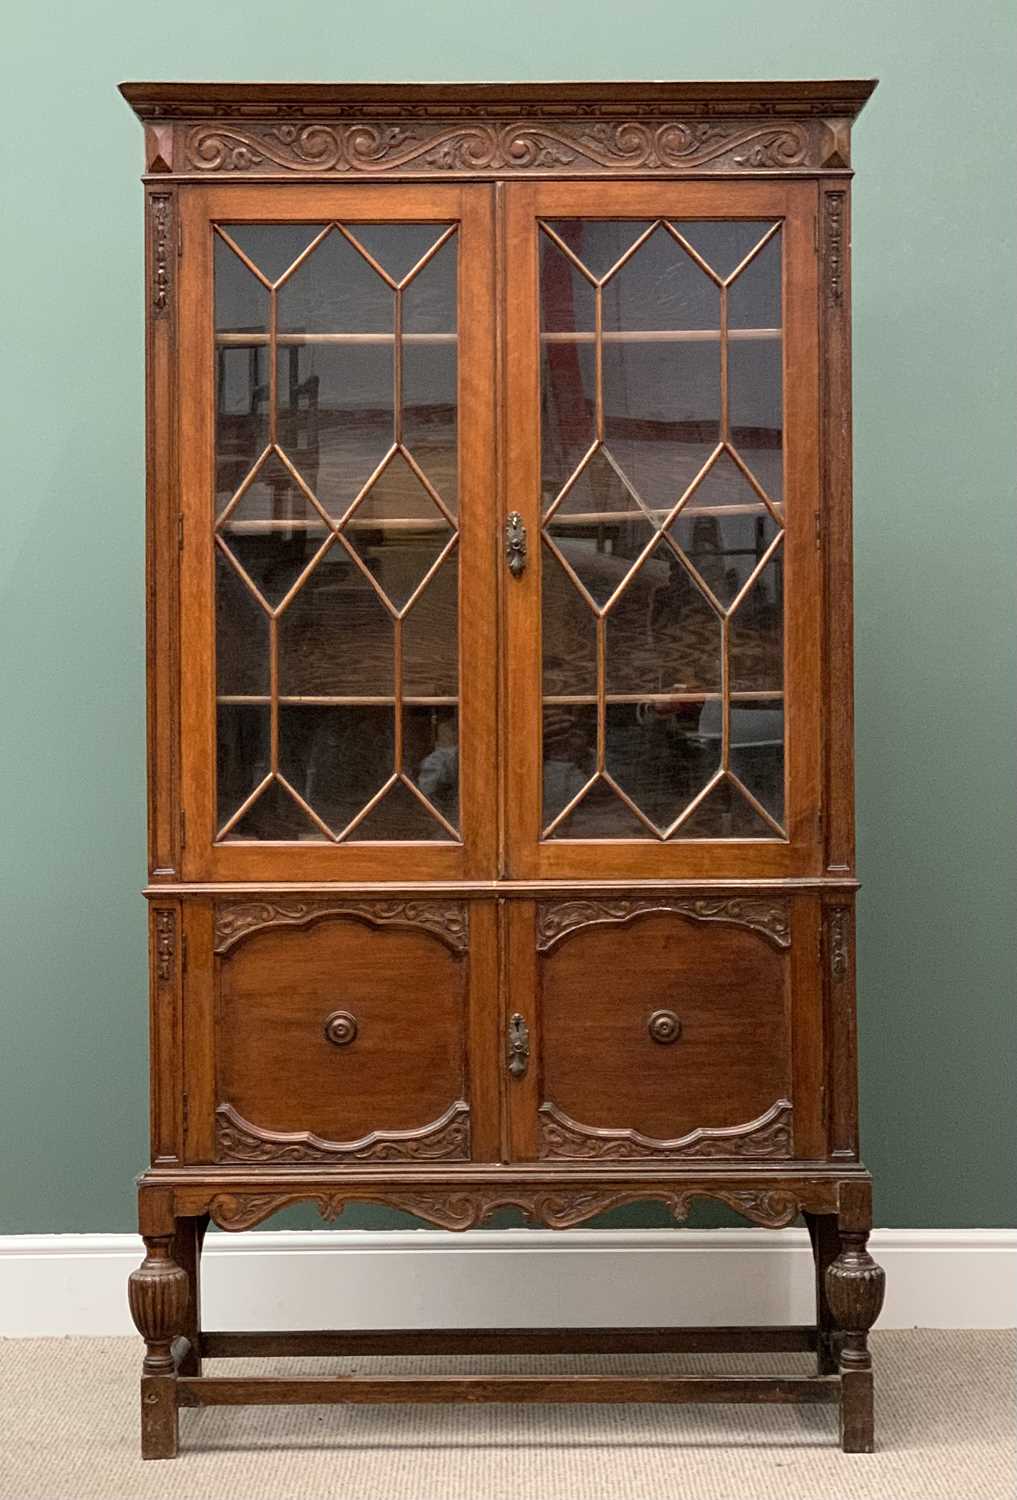 AN OAK EDWARDIAN BOOKCASE CUPBOARD - with carved detail, astragal type glazed twin doors, two